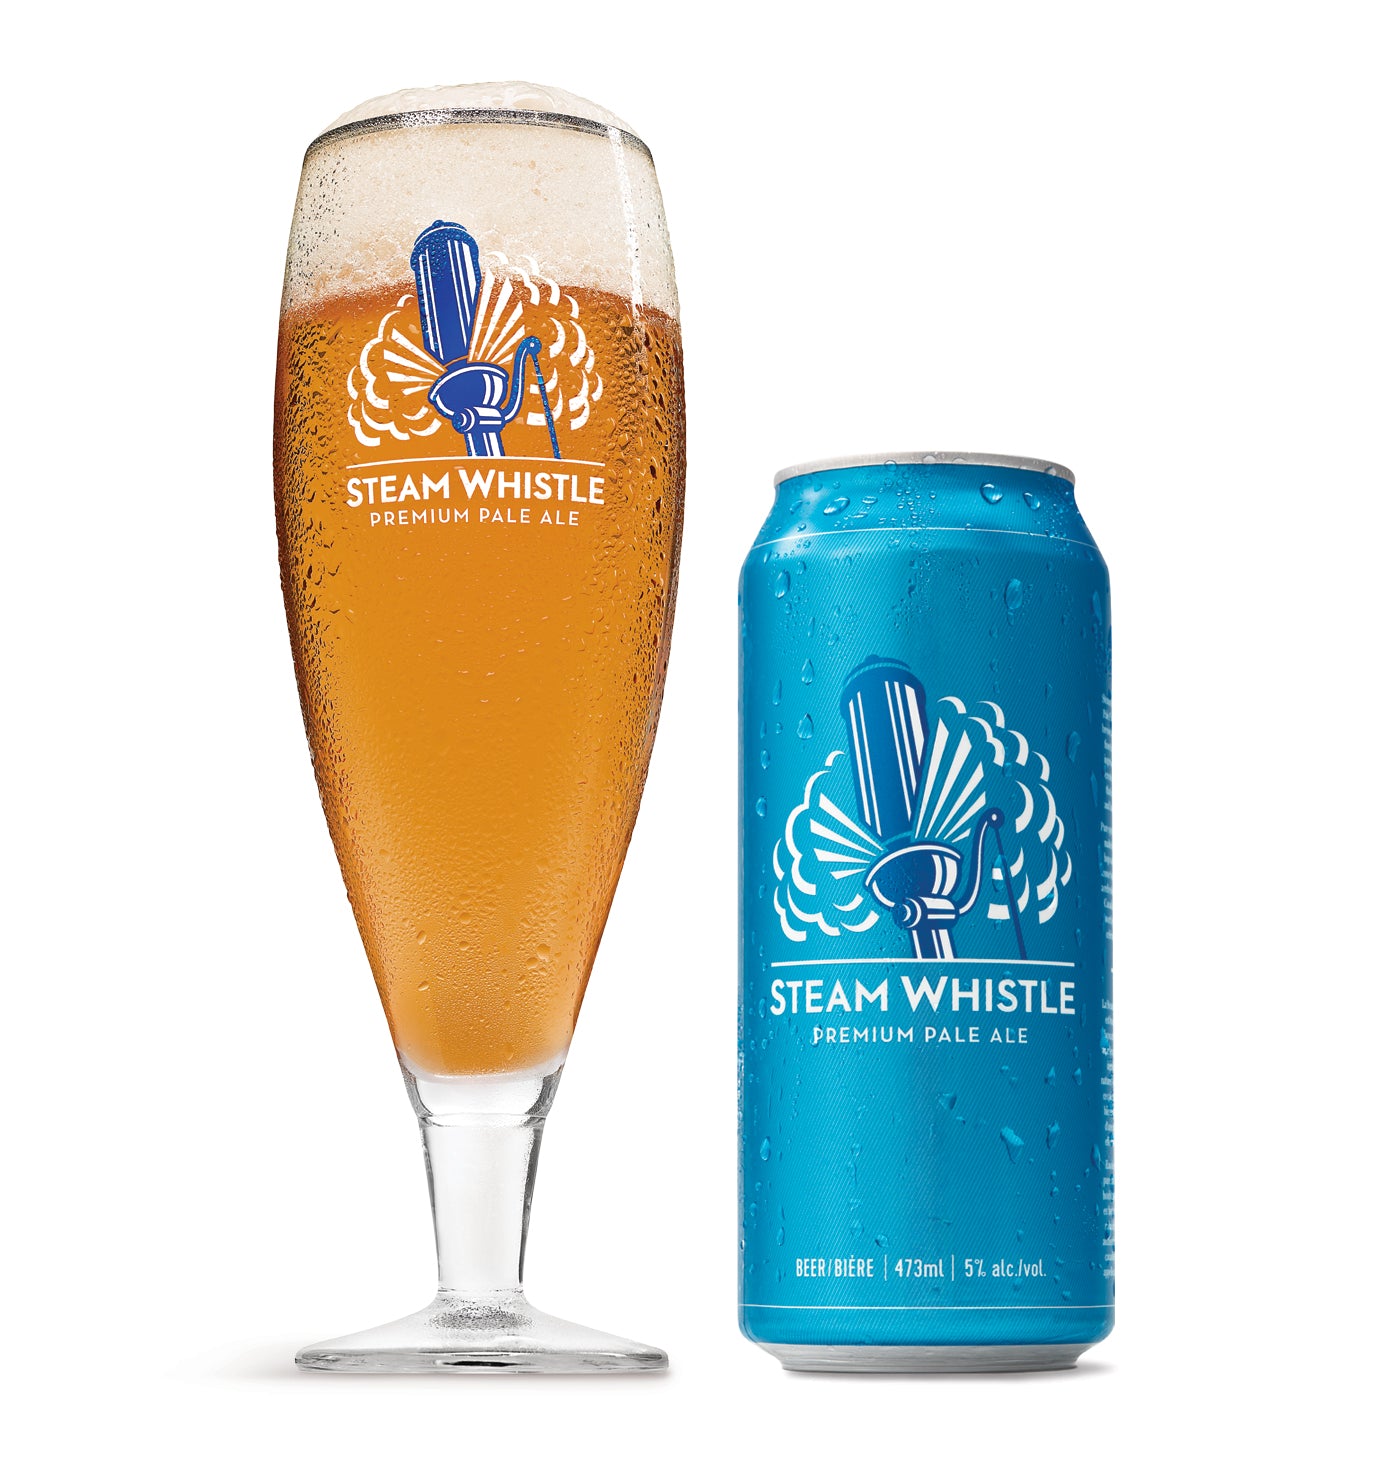 https://cdn.shopify.com/s/files/1/0641/4286/8715/files/steamwhistle-can-and-glass.jpg?v=1697221678